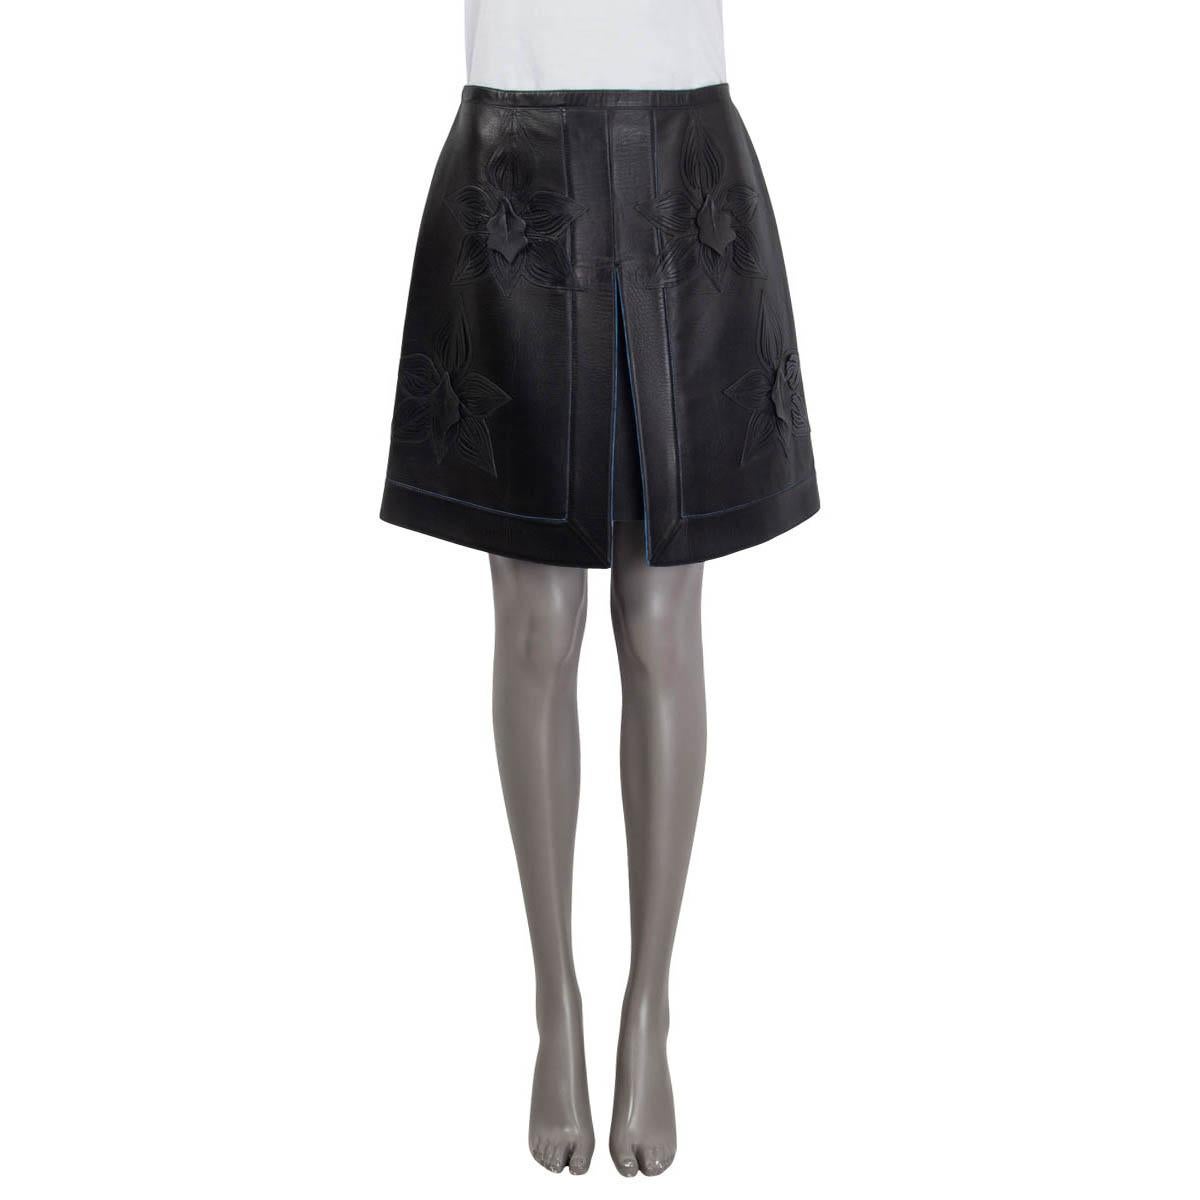 100% authentic Fendi pleated knee-length skirt in black lamb leather (100%). Features floral leather applications and a front slit. Opens with a zipper at the back. Unlined. Has been worn and is in excellent condition.

Measurements
Tag